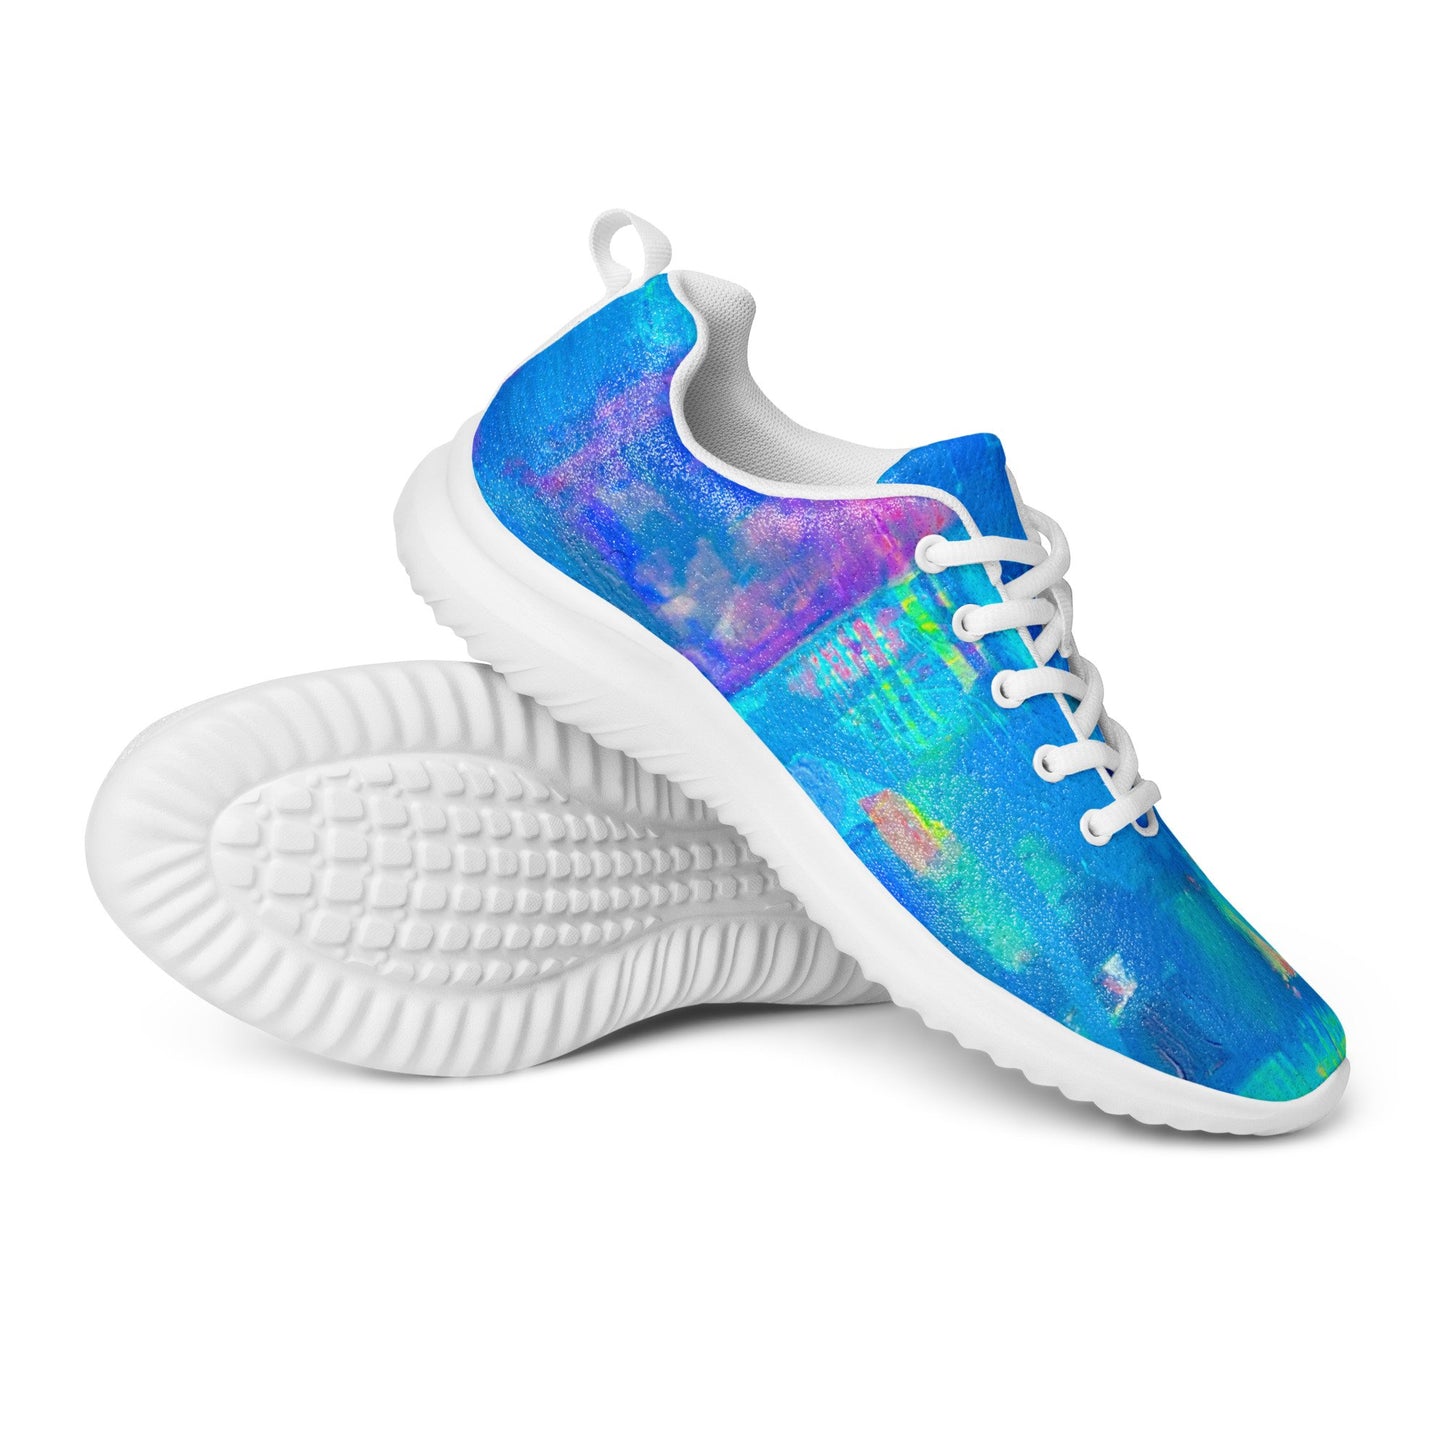 Coloring the Motion - Women’s athletic shoes